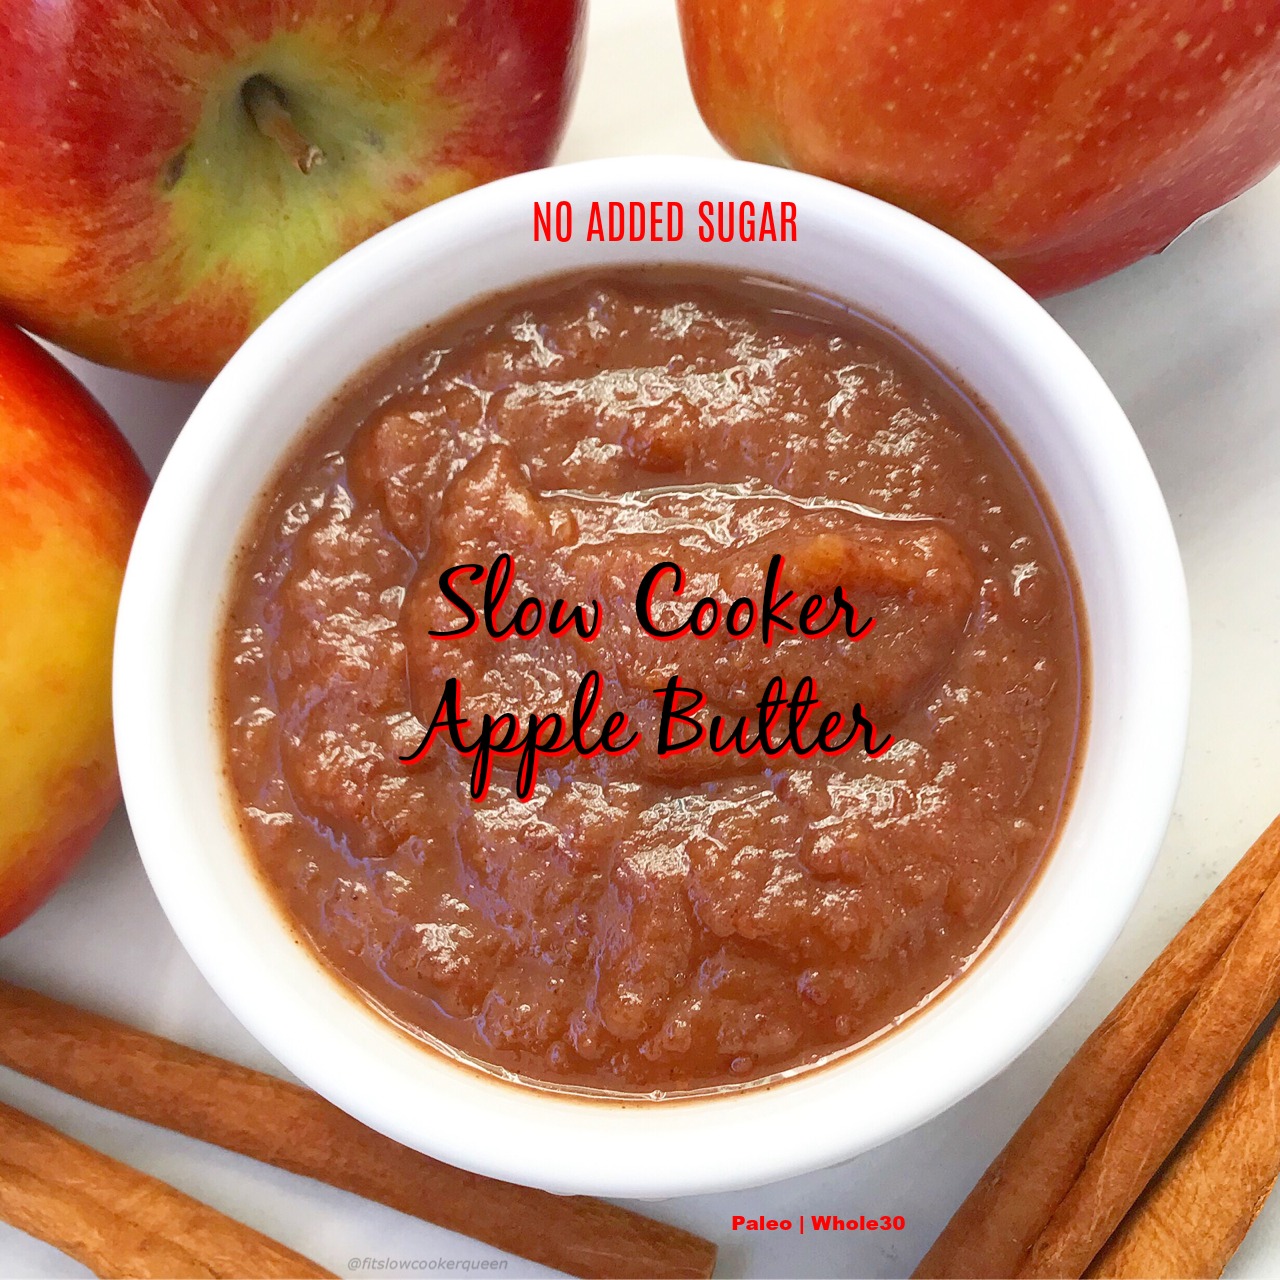 This healthy slow cooker apple butter recipe has NO ADDED SUGAR making it whole30 and paleo compliant while still being super easy.